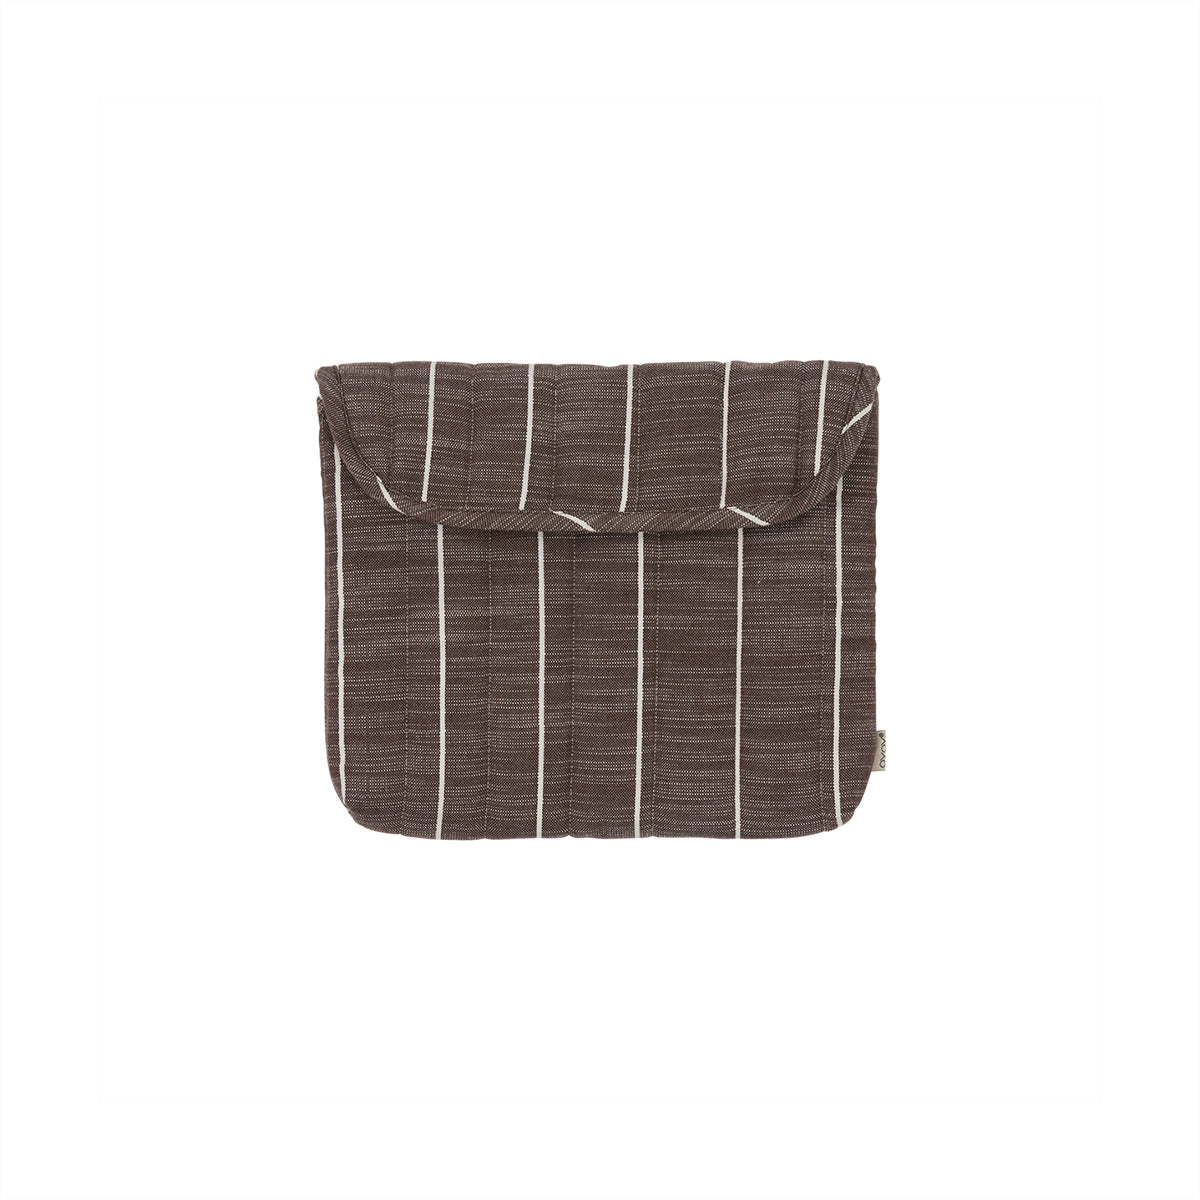 OYOY LIVING Futo Sleeve - Model 13'' Computer Sleeve 301 Brown / Offwhite